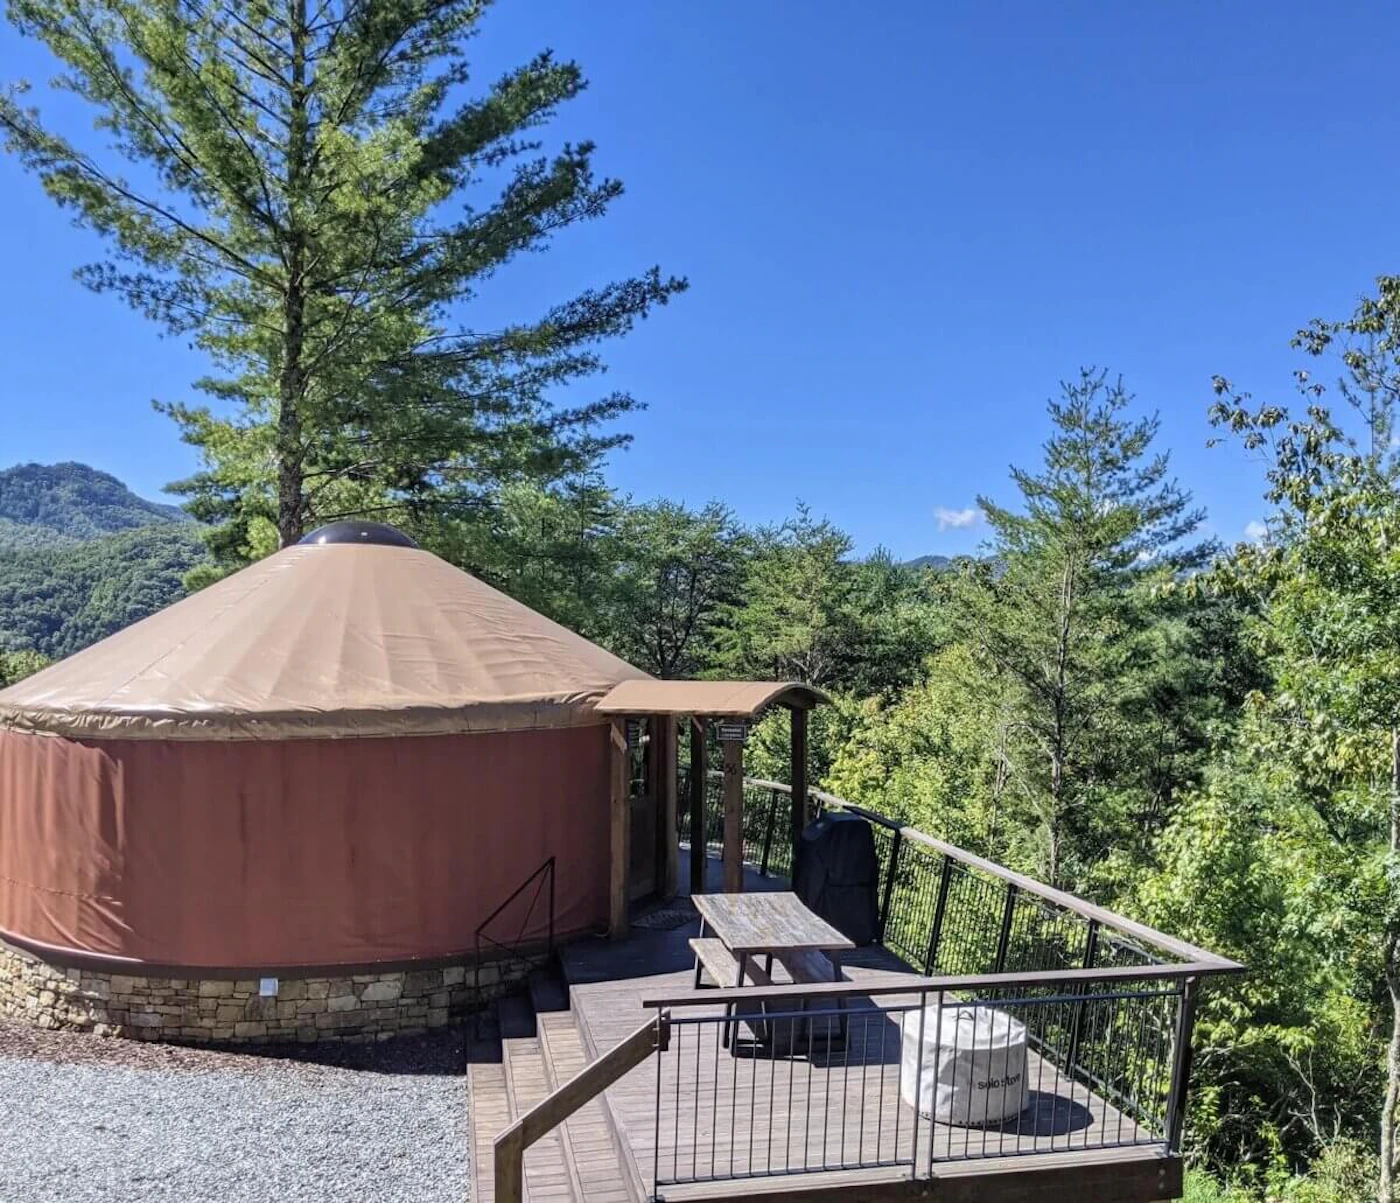 Sky Ridge Yurts in Bryson City features an upscale take on yurts, portable tents historically used by nomadic groups in Central Asia. (Image via Sky Ridge Yurts)